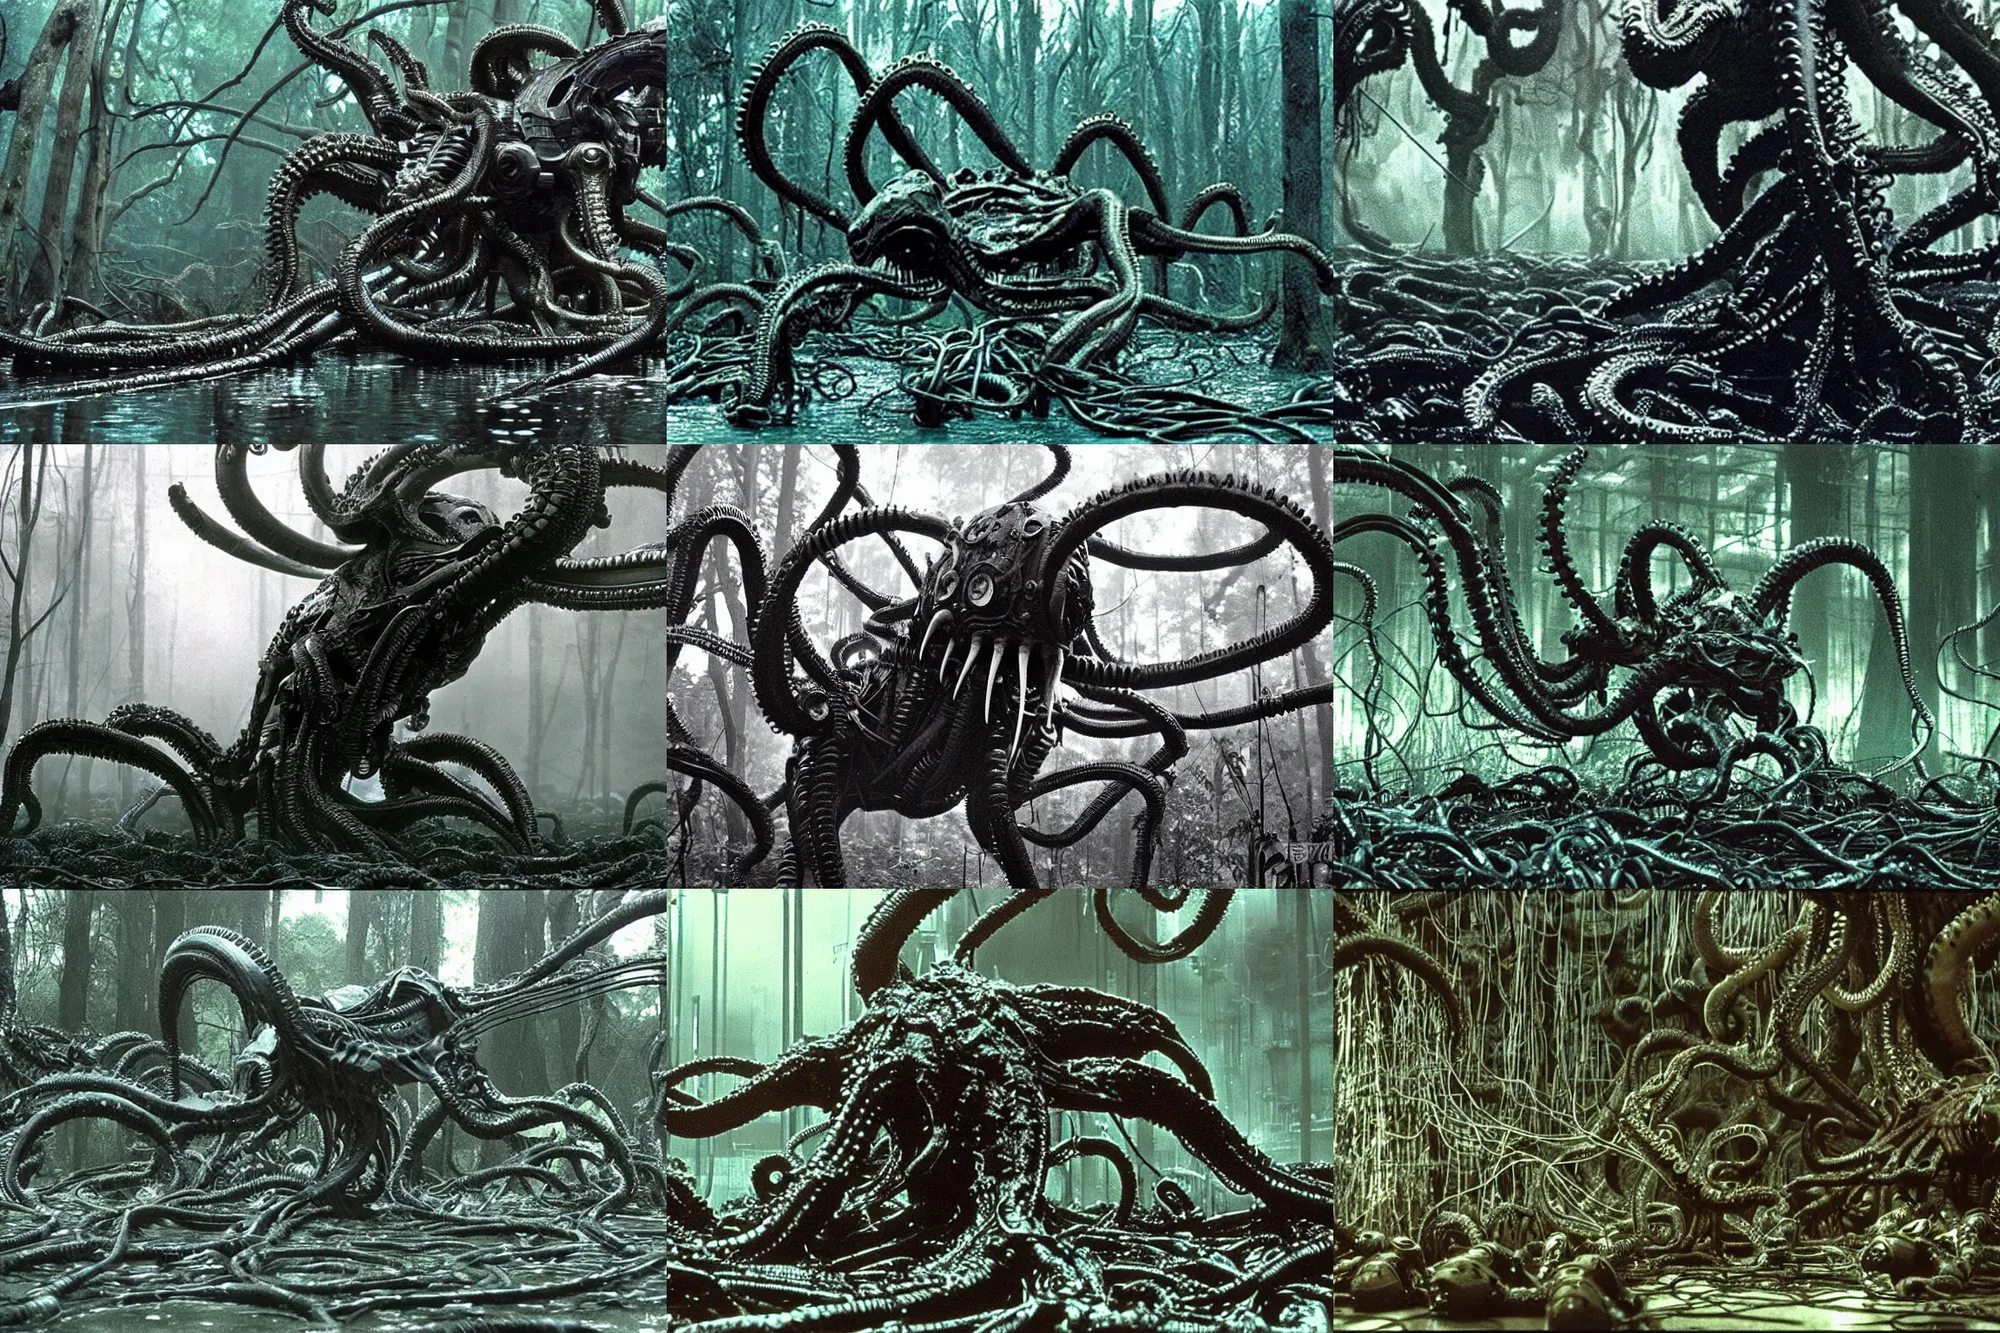 Prompt: Xenomorph octopus in a Swamp full of trees made out of thousands of wires and pipes, Large Xenomorph approaching, film still from Aliens by James Cameron